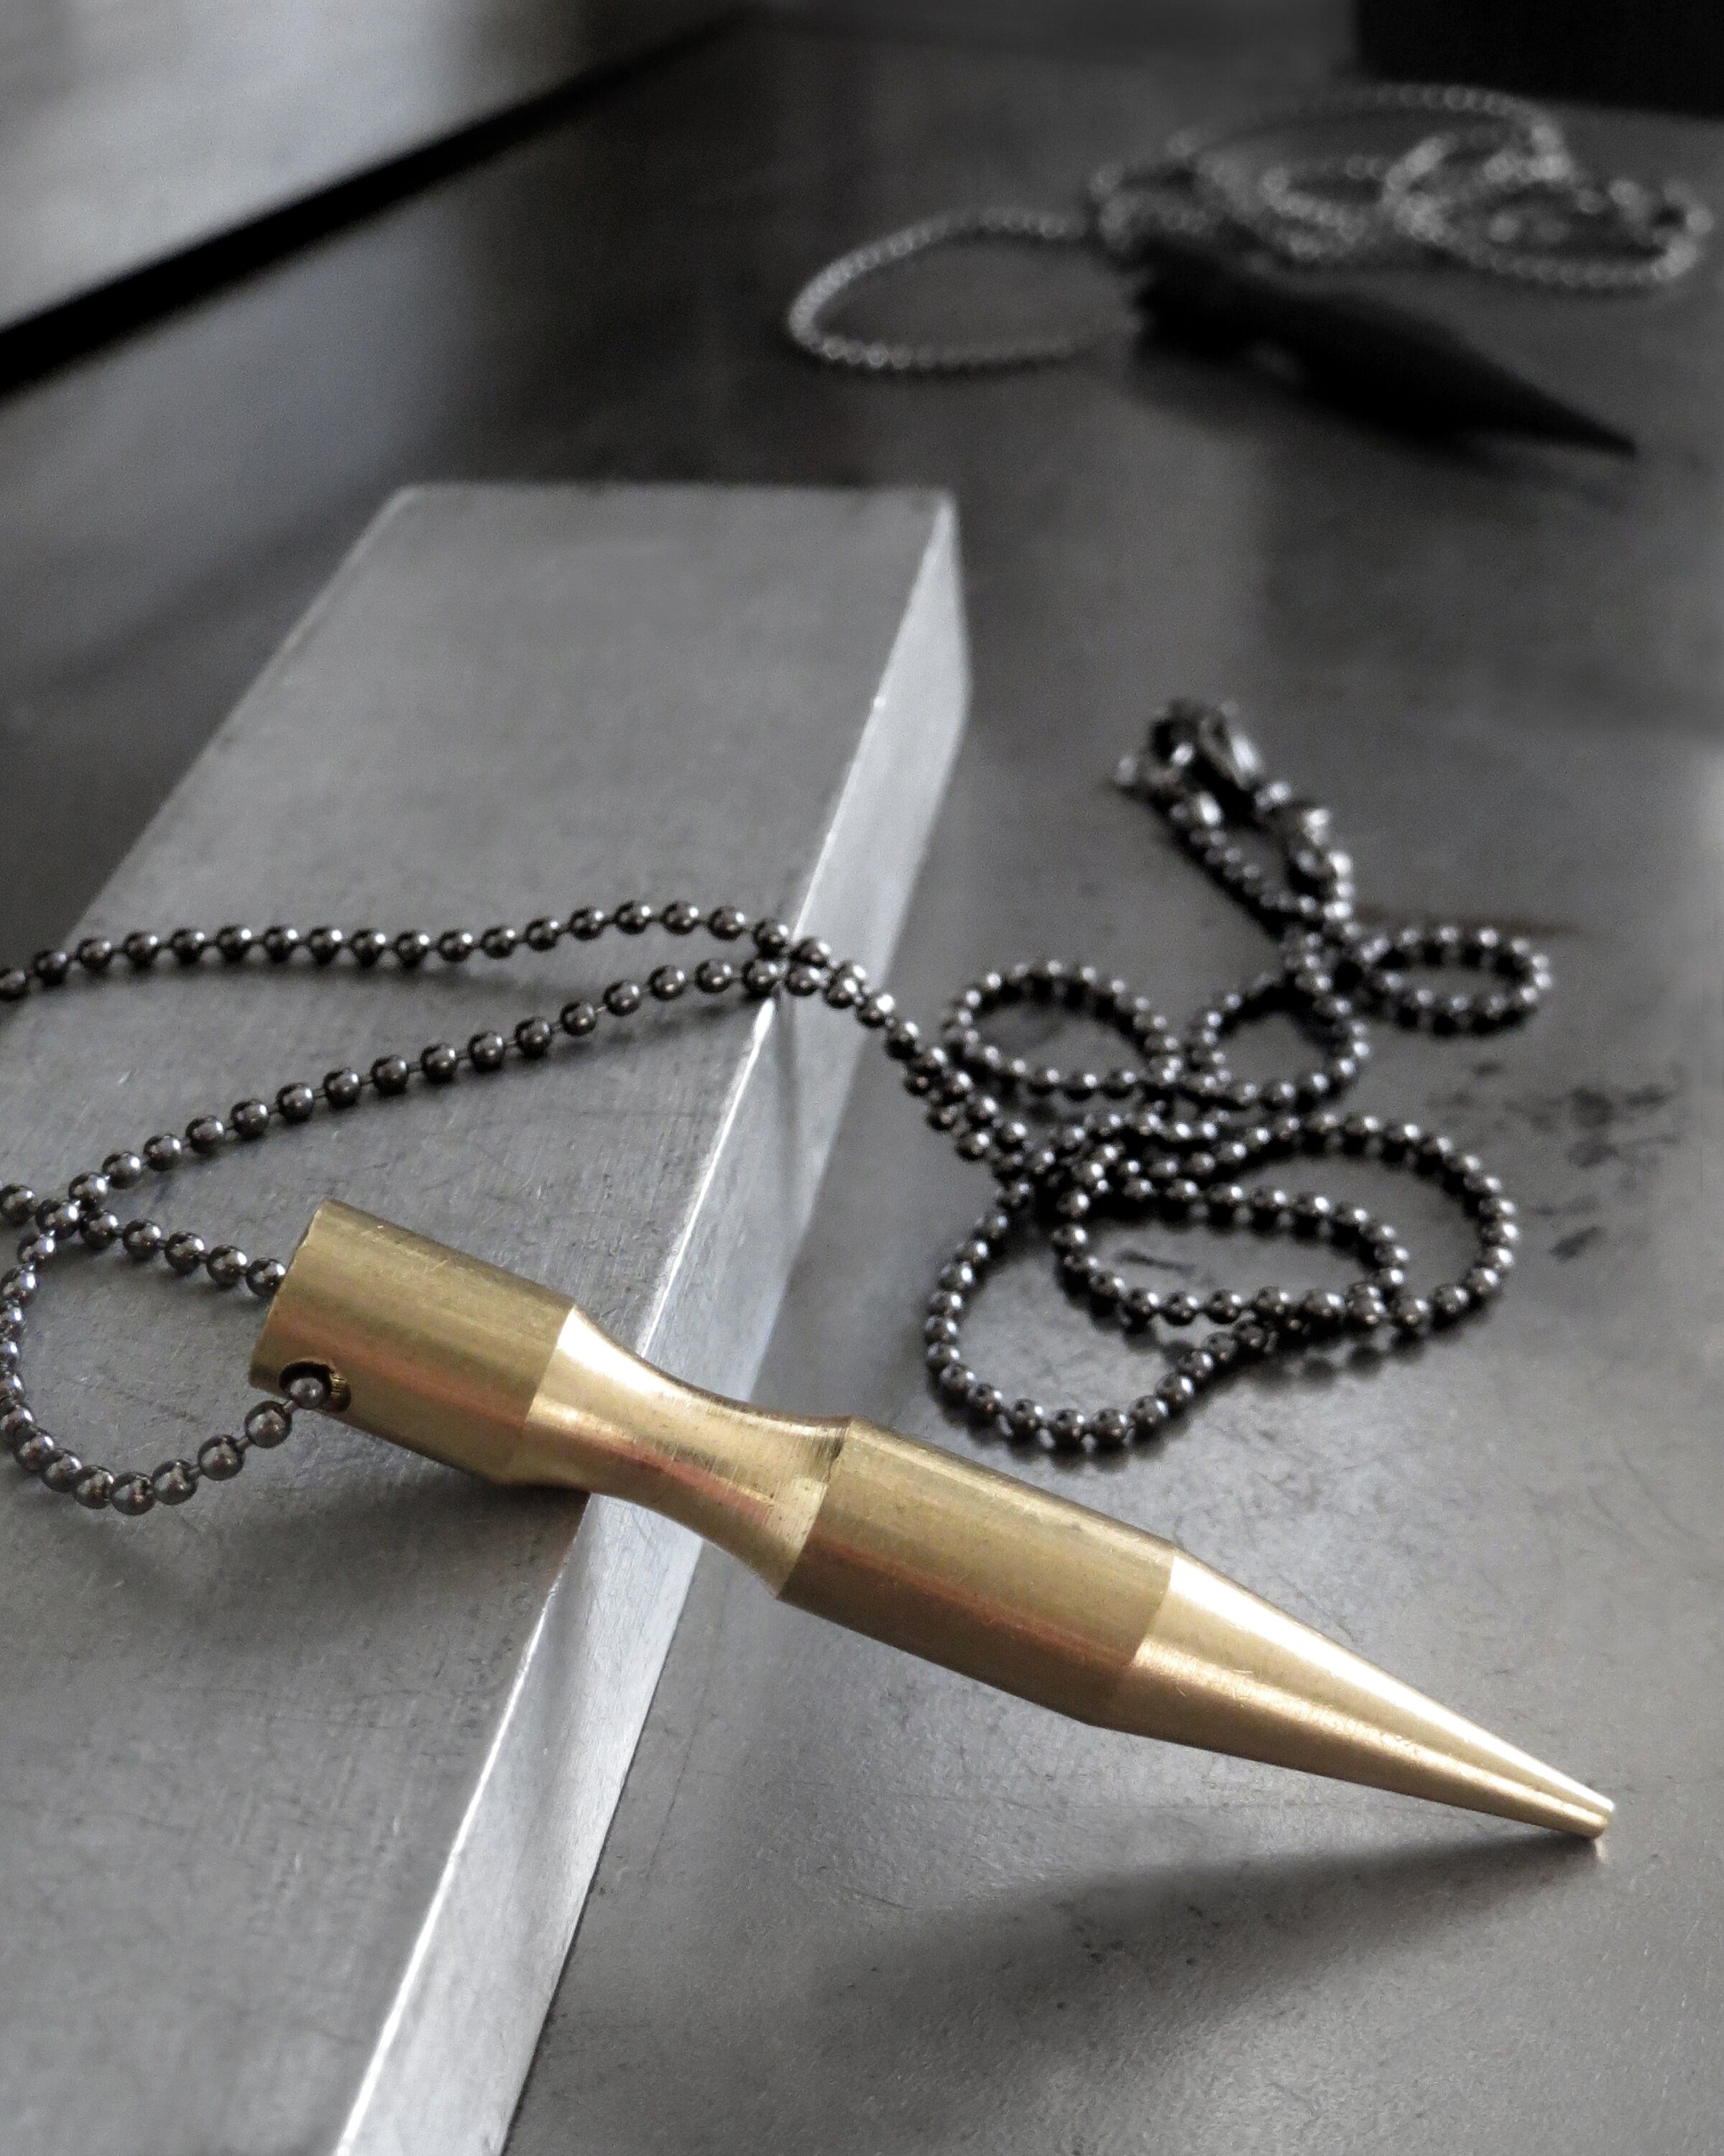 PIERCE - Bullet Spike Pendant Necklace on Black Ball Chain - Matte Black or Old Gold Brass Spike - Mens Spike Necklace, Unisex Jewelry